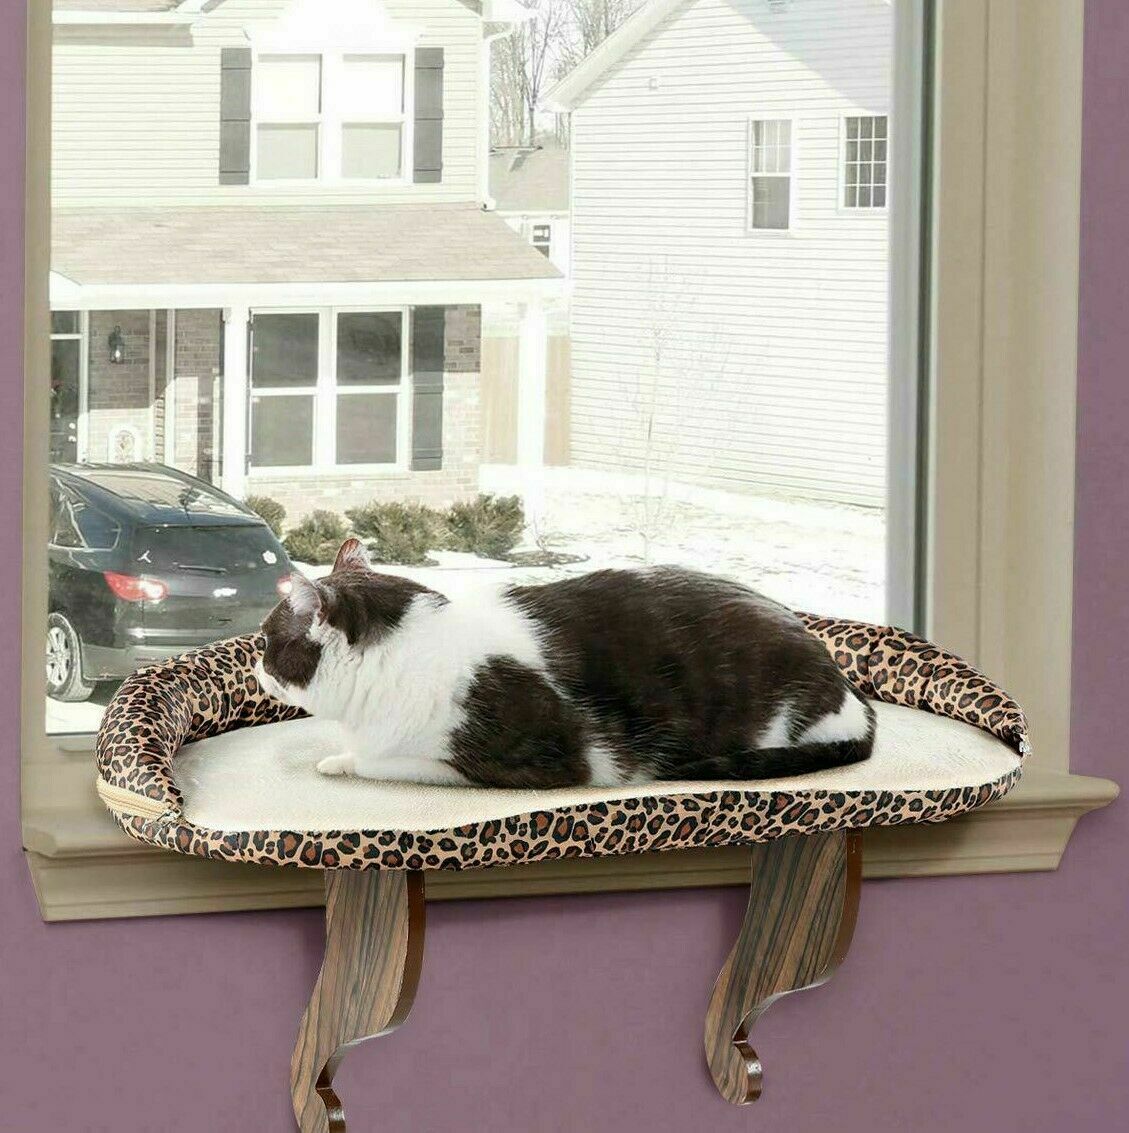 Cat Sill Pet Cat Bed Window Perch Seat Mounted Shelf with Soft Cushion and Bolster for Kitten -Large Size Deluxe